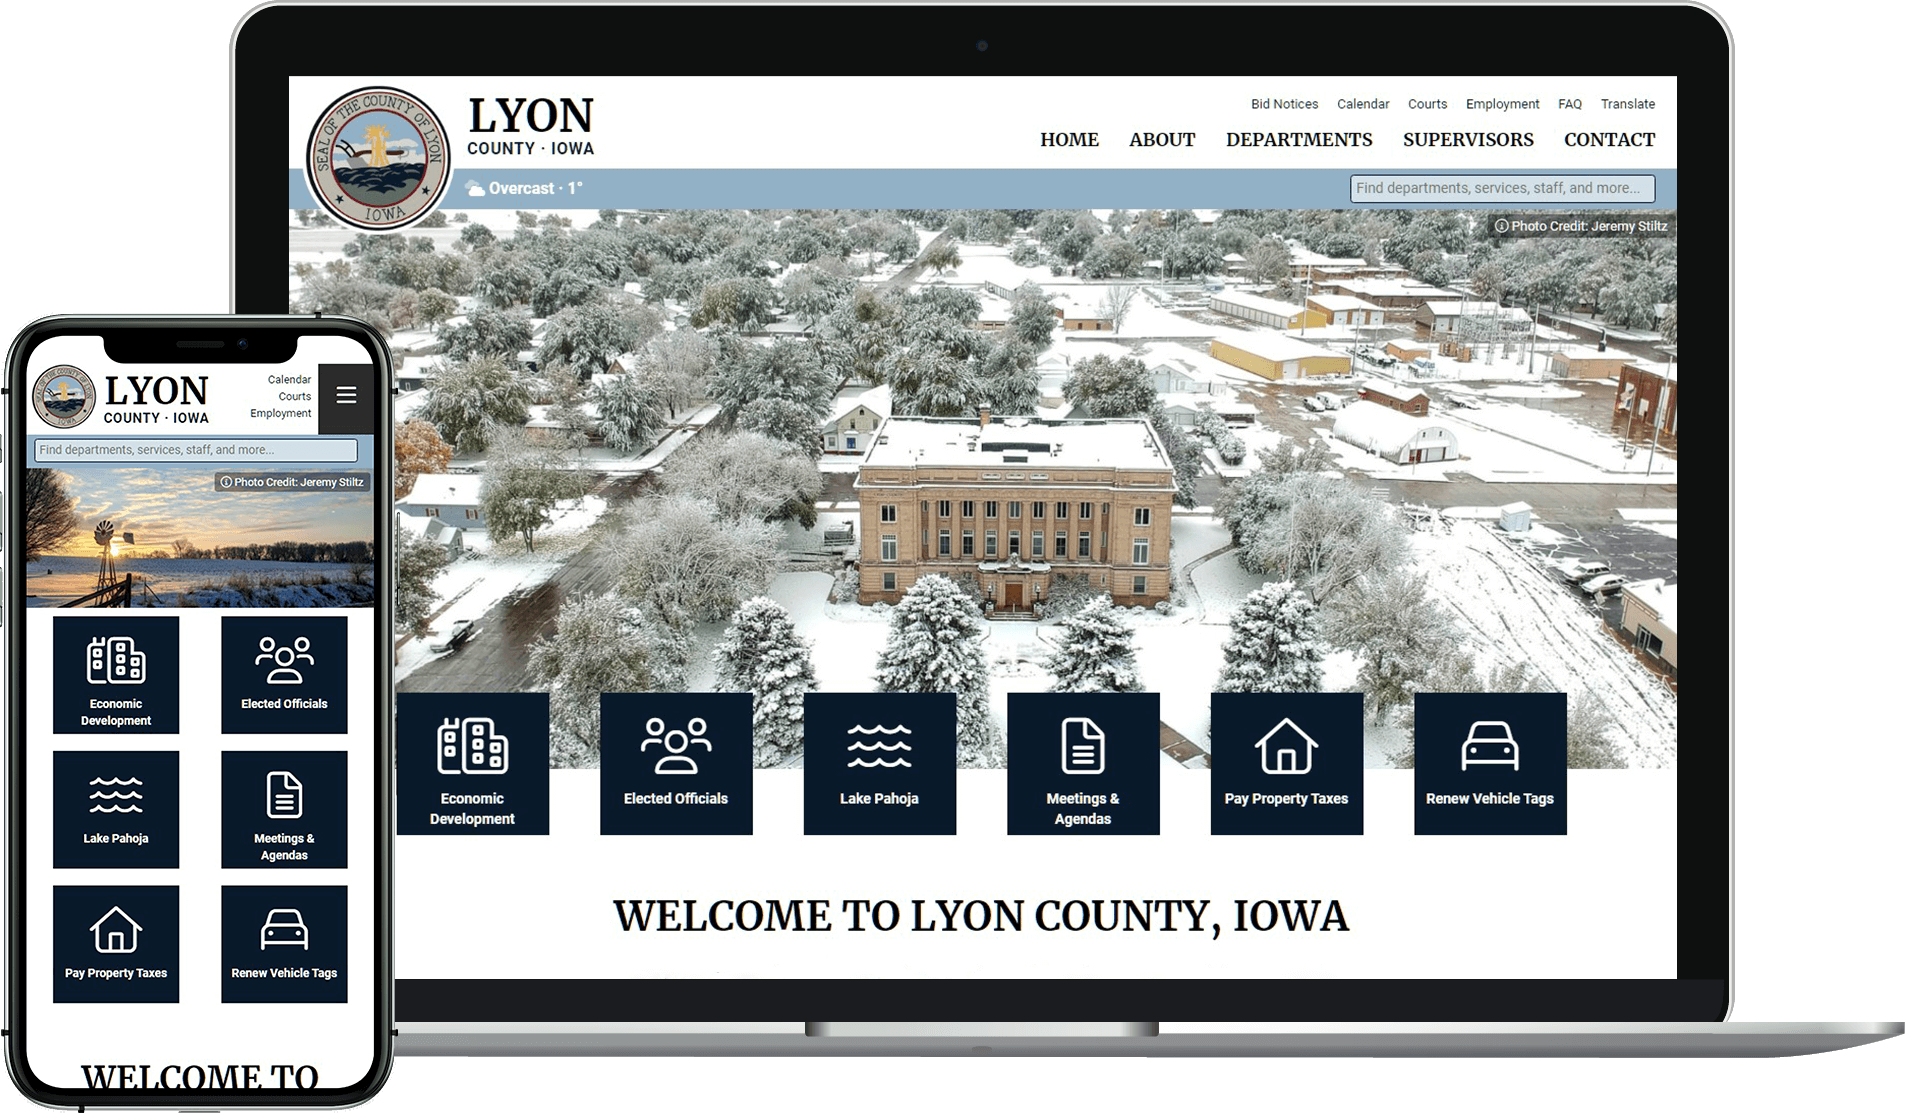 Lyon County website homepage on desktop and mobile device